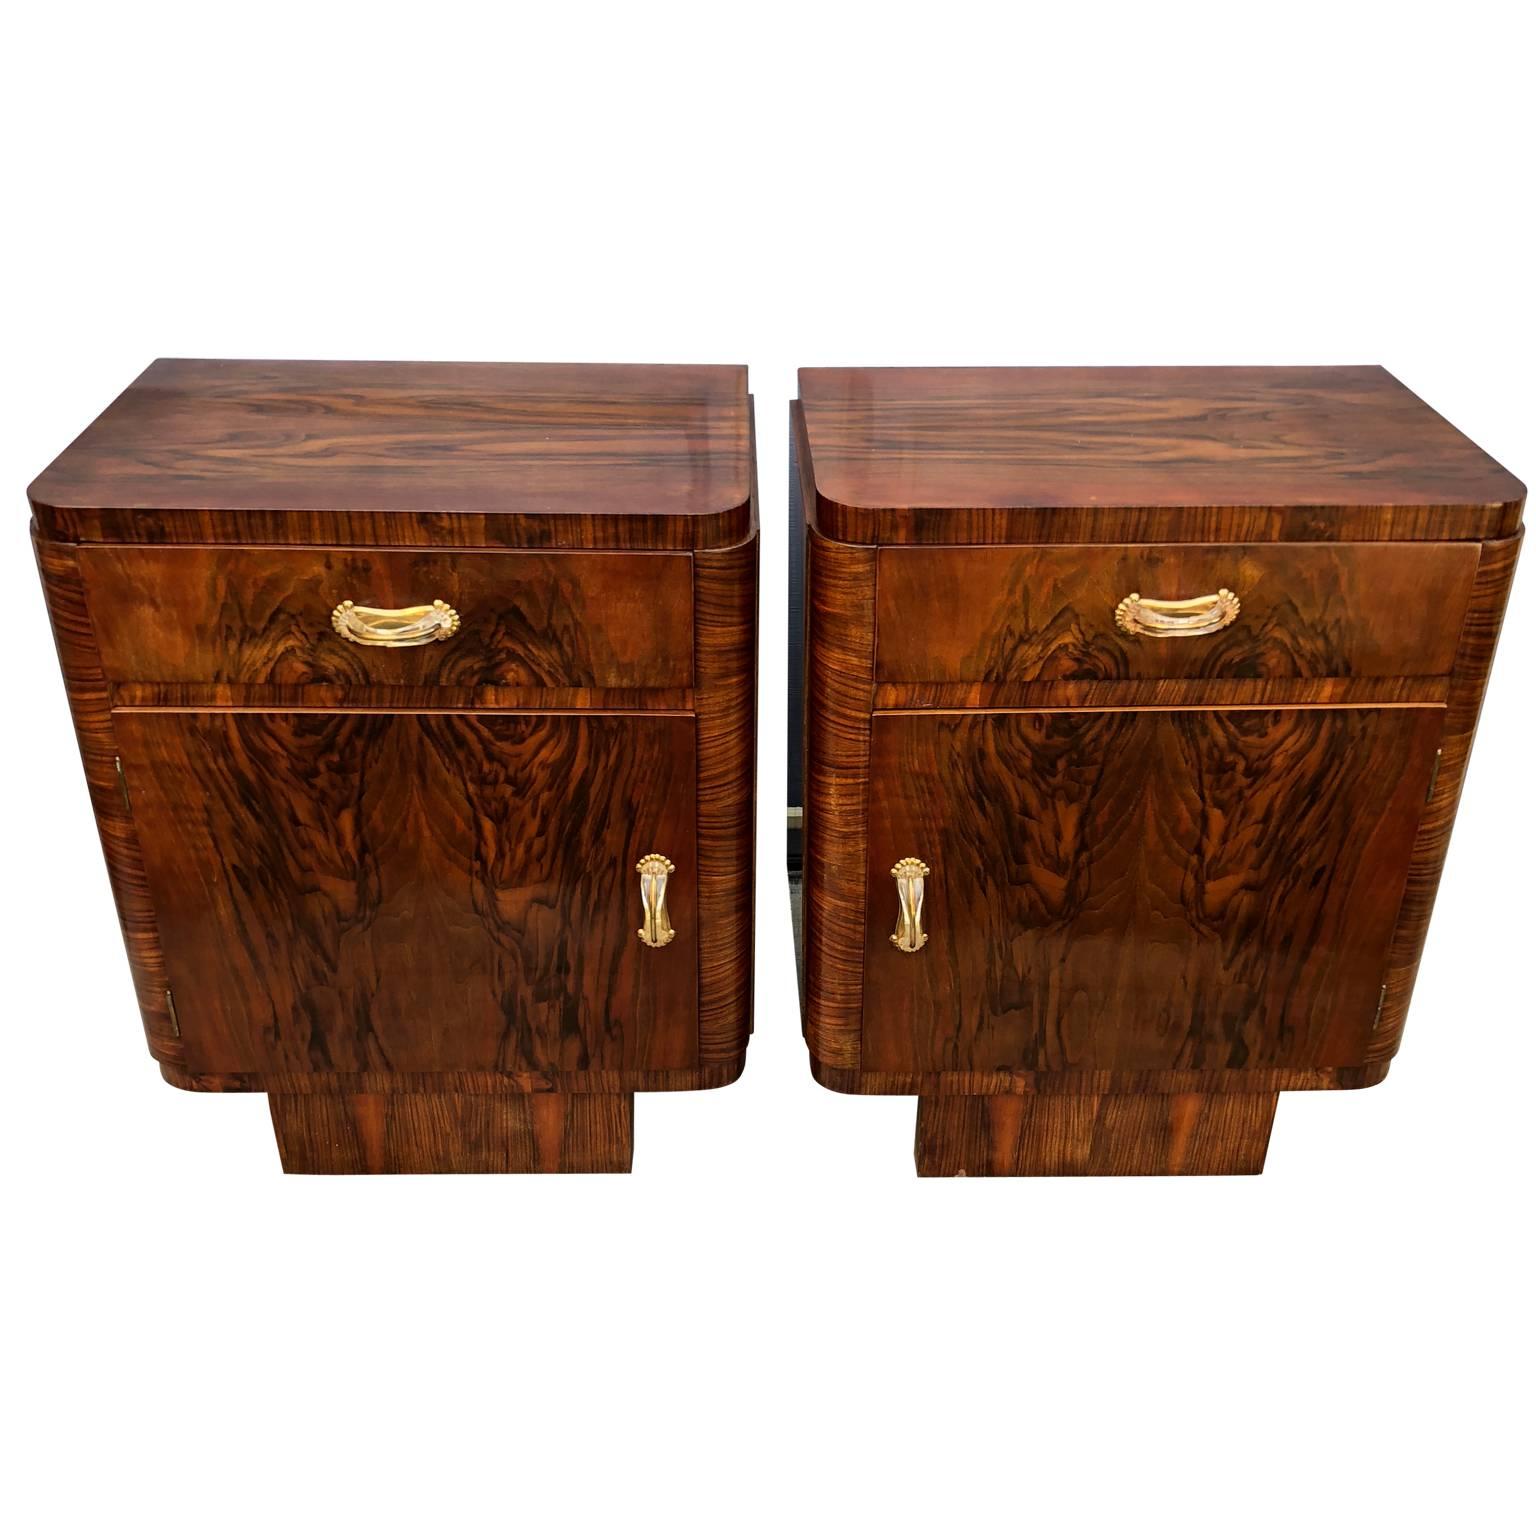 Pair of Italian Art Deco Night Stand Tables